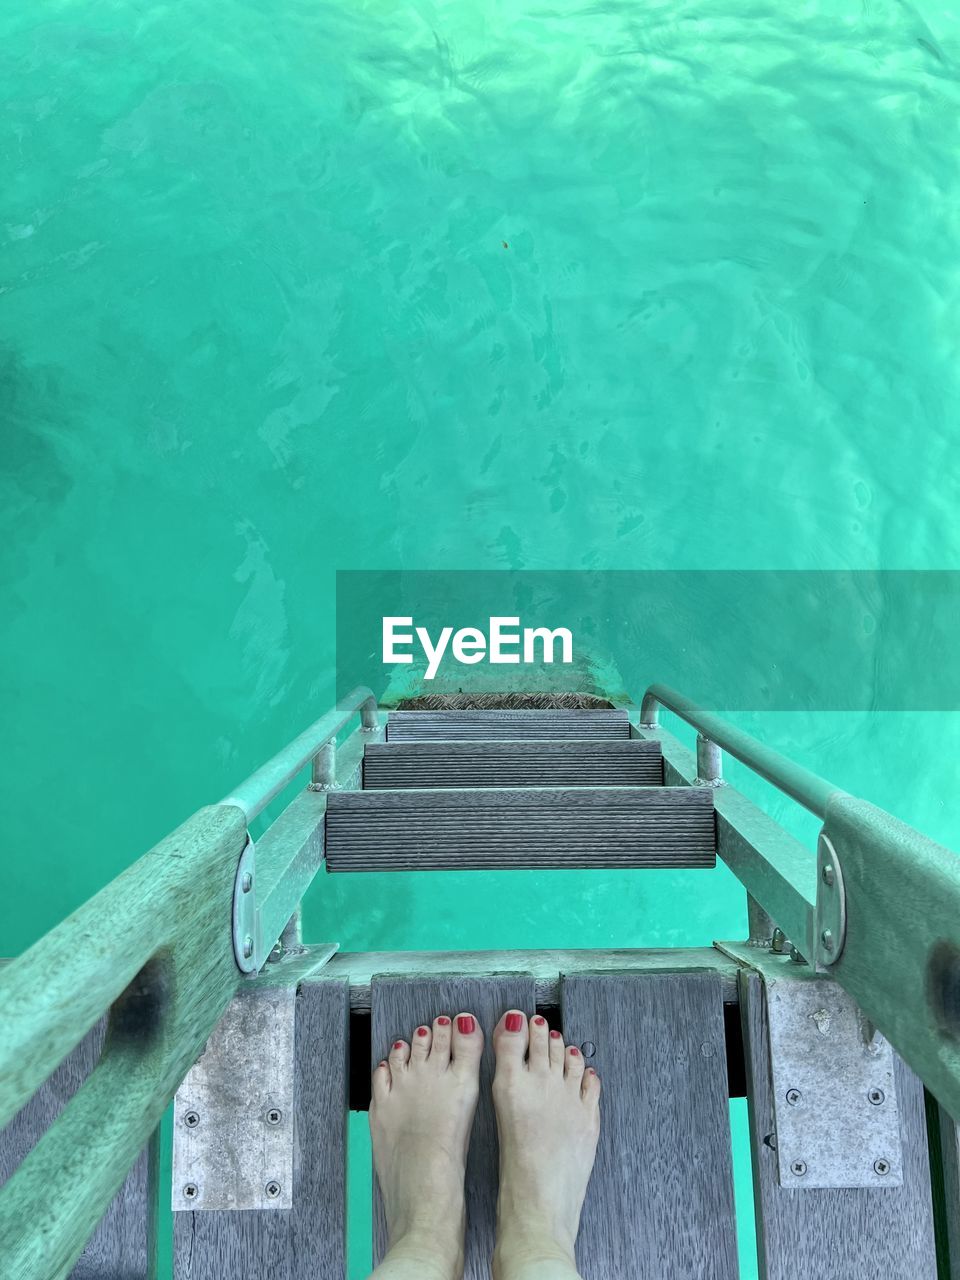 water, low section, human leg, one person, personal perspective, high angle view, human foot, lifestyles, barefoot, nature, swimming pool, leisure activity, adult, day, women, relaxation, human limb, directly above, limb, swimming, trip, vacation, holiday, outdoors, pier, poolside, standing, summer, sea, turquoise colored, wood, travel, underwater, railing, nail polish